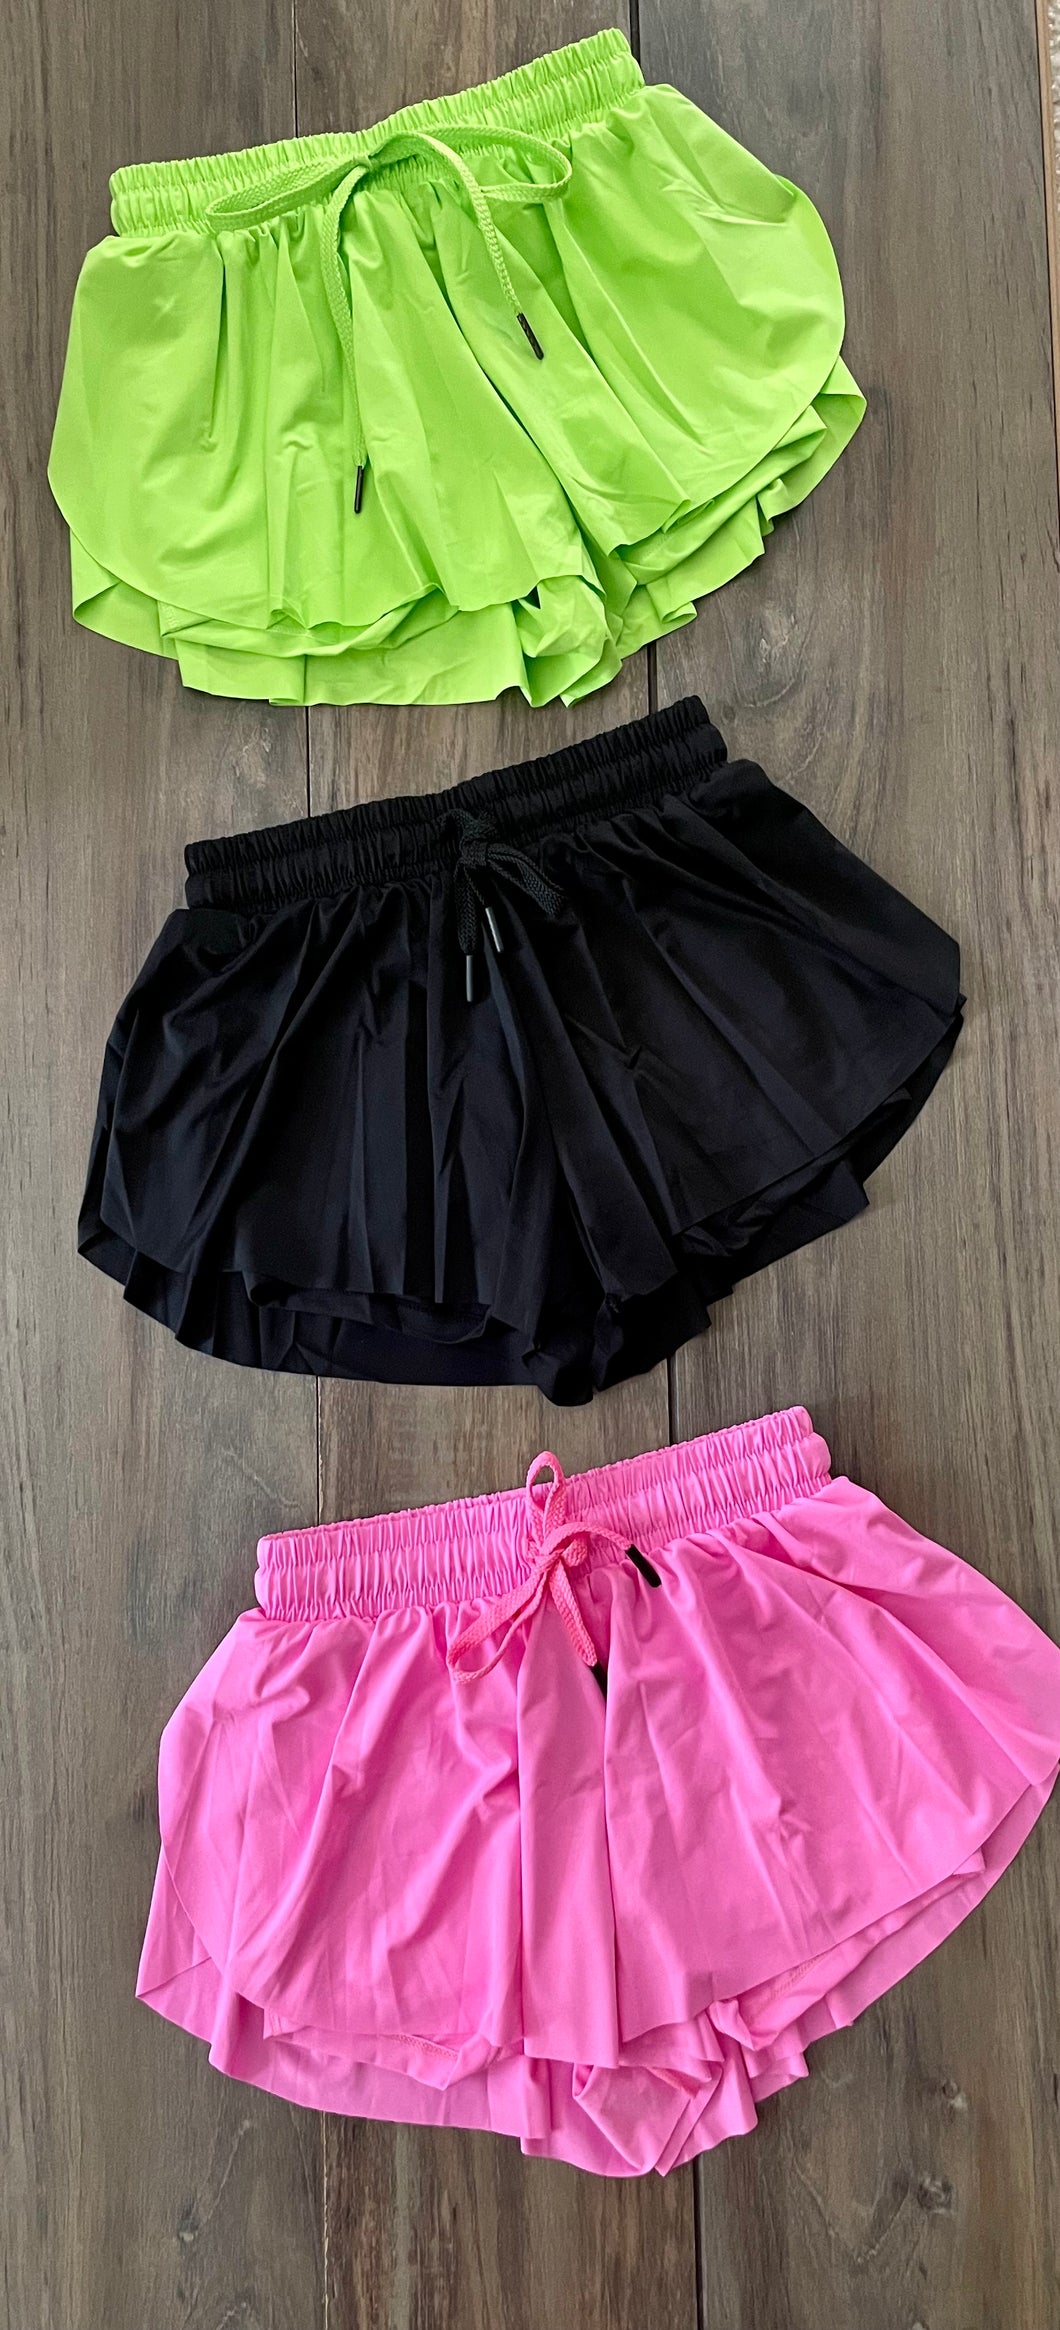 The Pirouette Pier Shorts